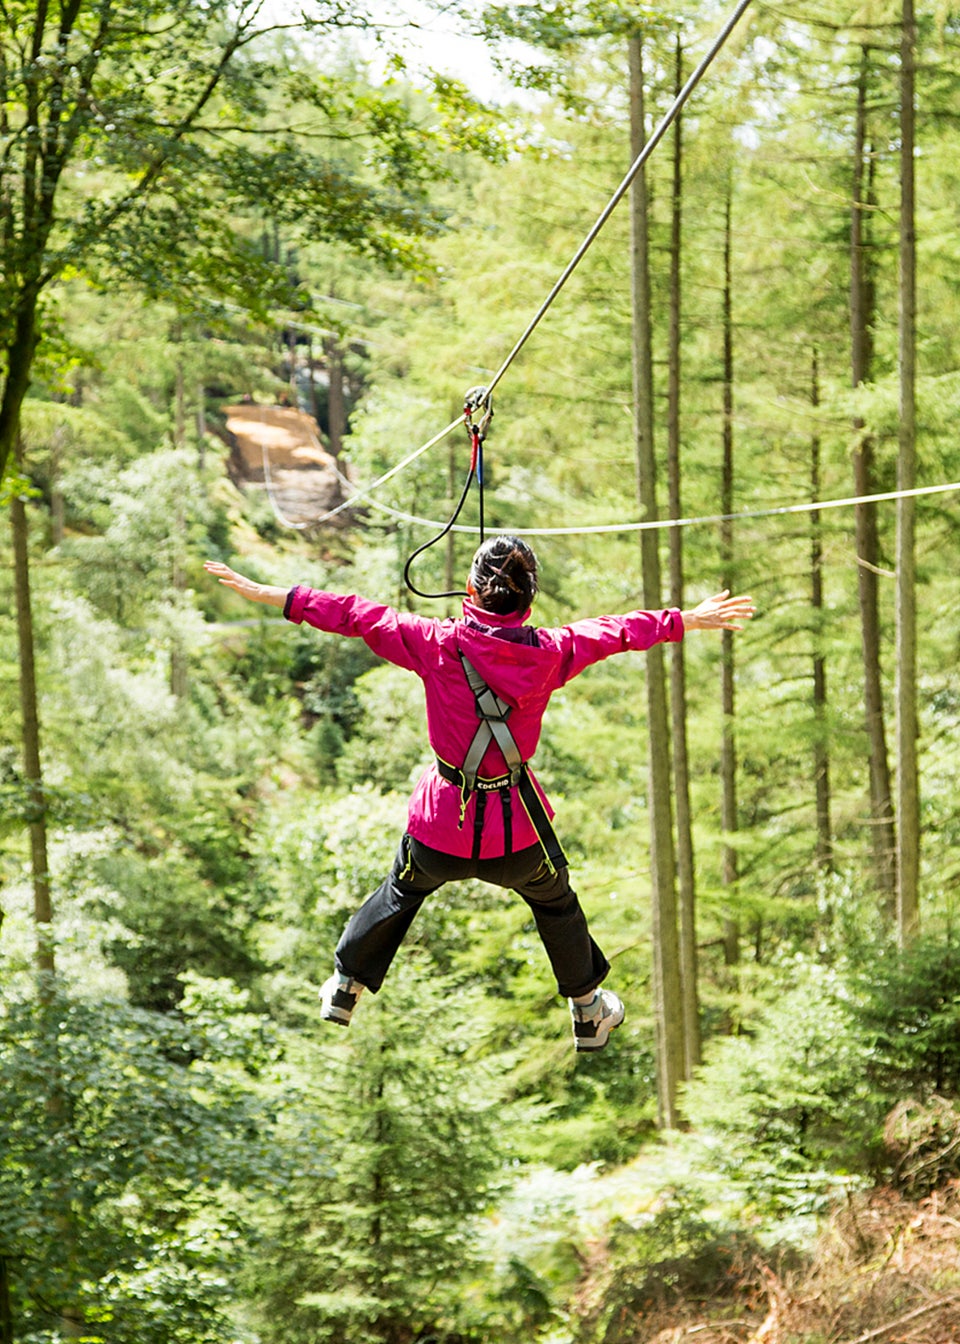 Virgin Experience Days Tree-top Challenge for Two with Go Ape